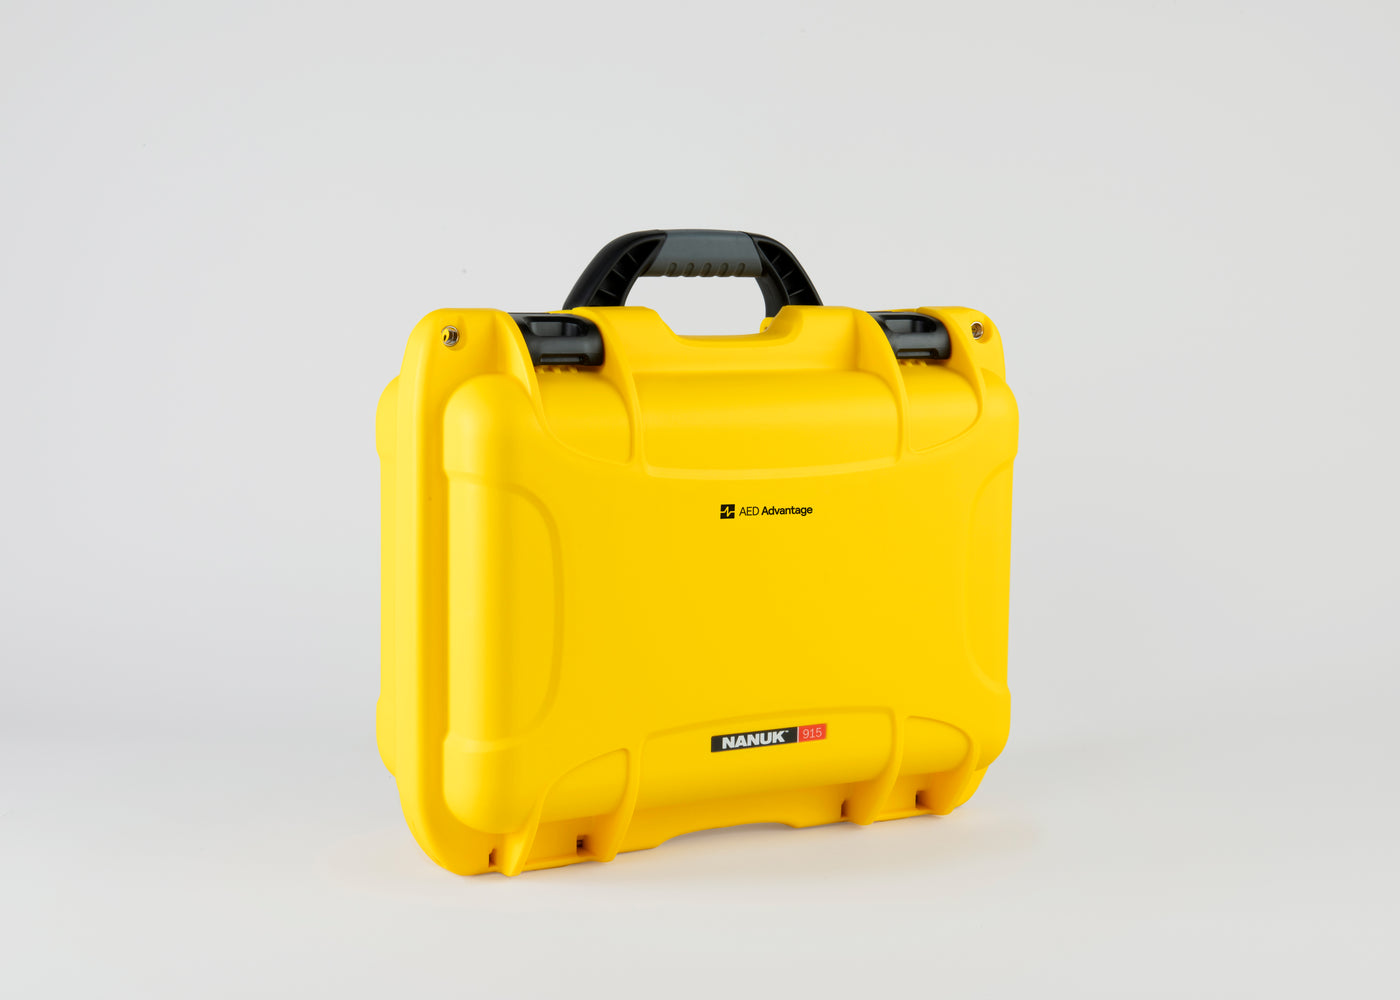 First Responder AED Kit